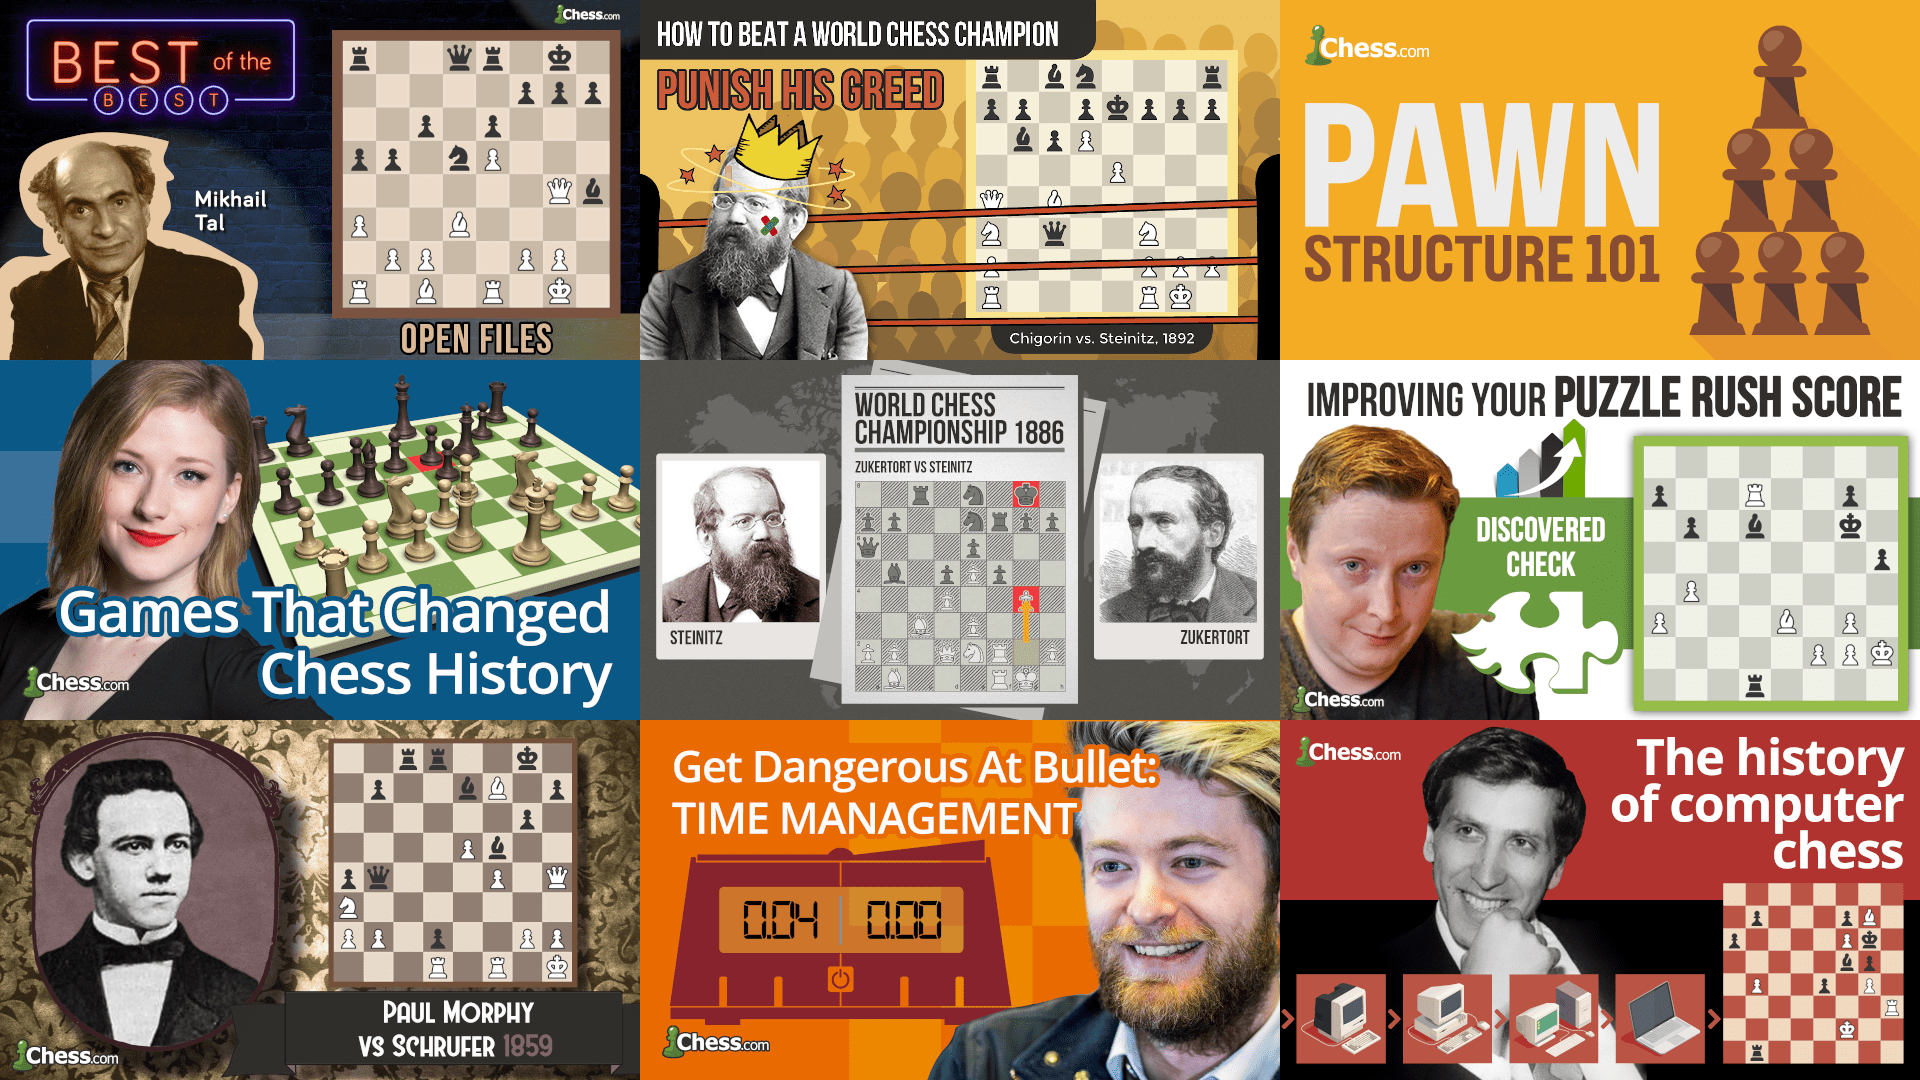 Thought the chess24 website could do with a facelift. : r/chess